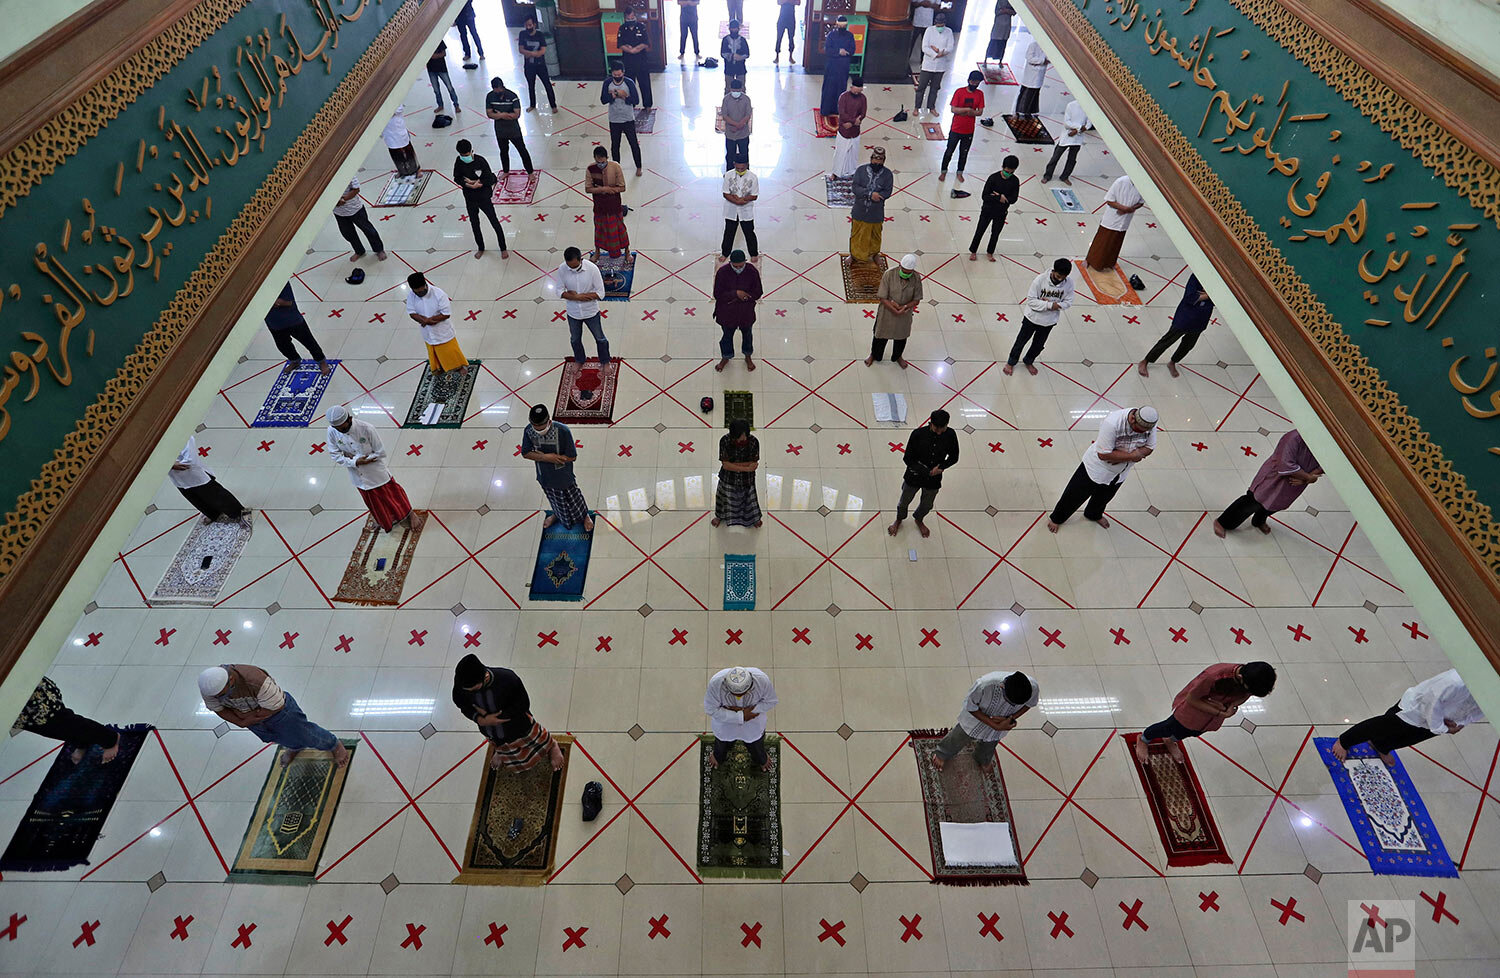  Muslims pray spaced apart to help curb the spread of the coronavirus during a Friday prayer at the Al Barkah Grand Mosque in Bekasi on the outskirts of Jakarta, Indonesia, Friday, May 29, 2020. (AP Photo/Achmad Ibrahim) 